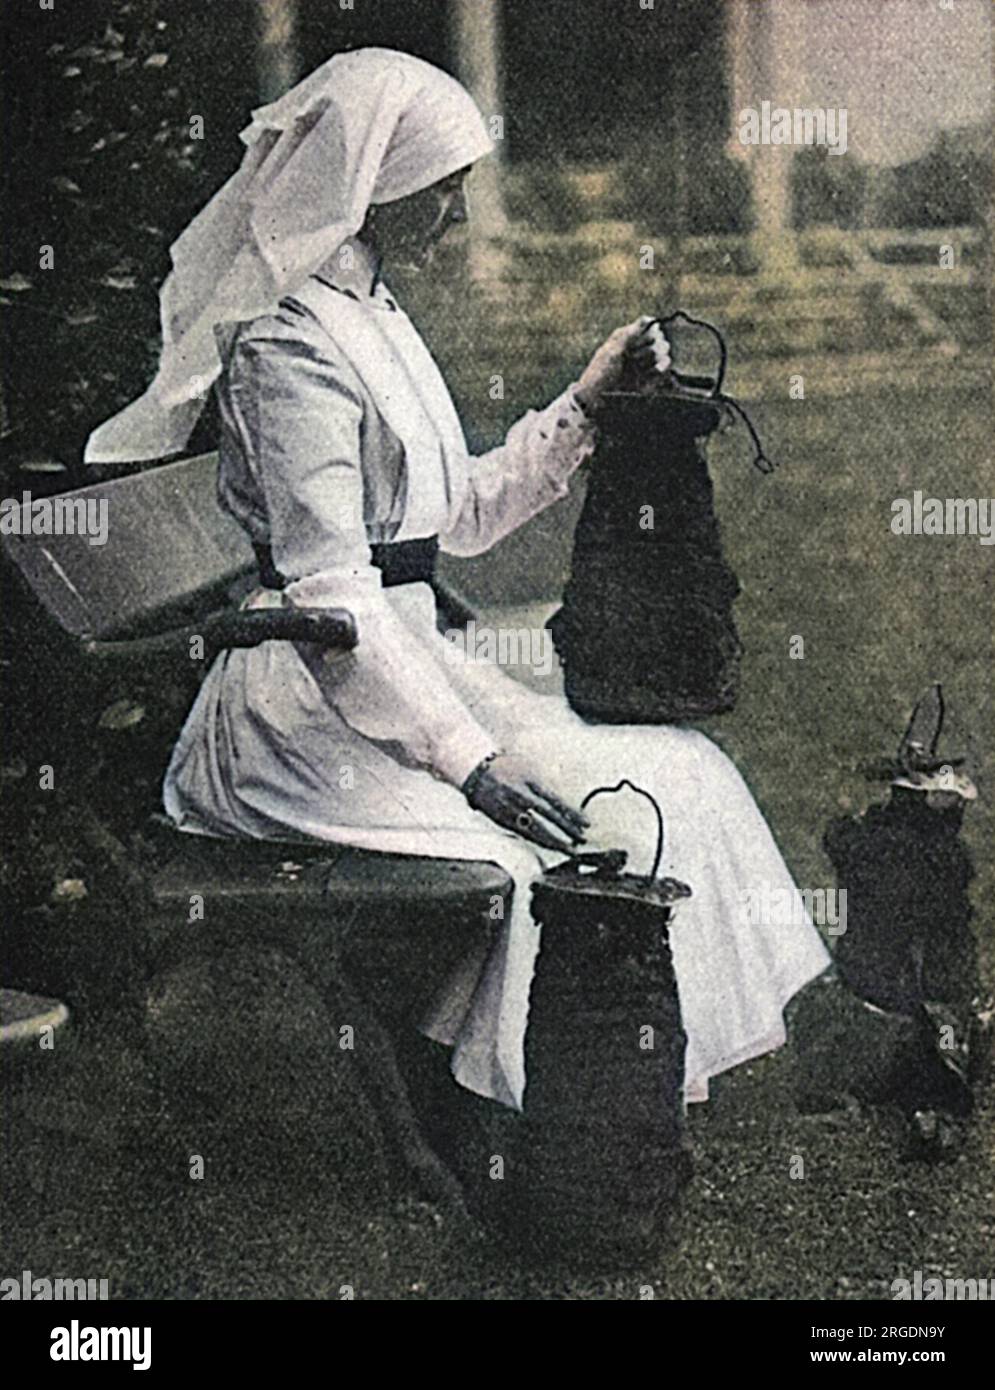 Lady Stradbroke, formerly Helena Fraser and wife of George Rous, 3rd Earl of Stradbroke, pictured in nurse's uniform at the family home of Henham Hall in Suffolk contemplating the bombs dropped by German aircraft in April 1915. The house was converted into a military hospital during the First World War and received convoys of wounded soldiers directly from France, who were passed on to the Red Cross once sufficiently well. Lady Stradbroke took sole charge as matron and efficiently superintended the hospital. Henham Hall was demolished in 1953. Stock Photo